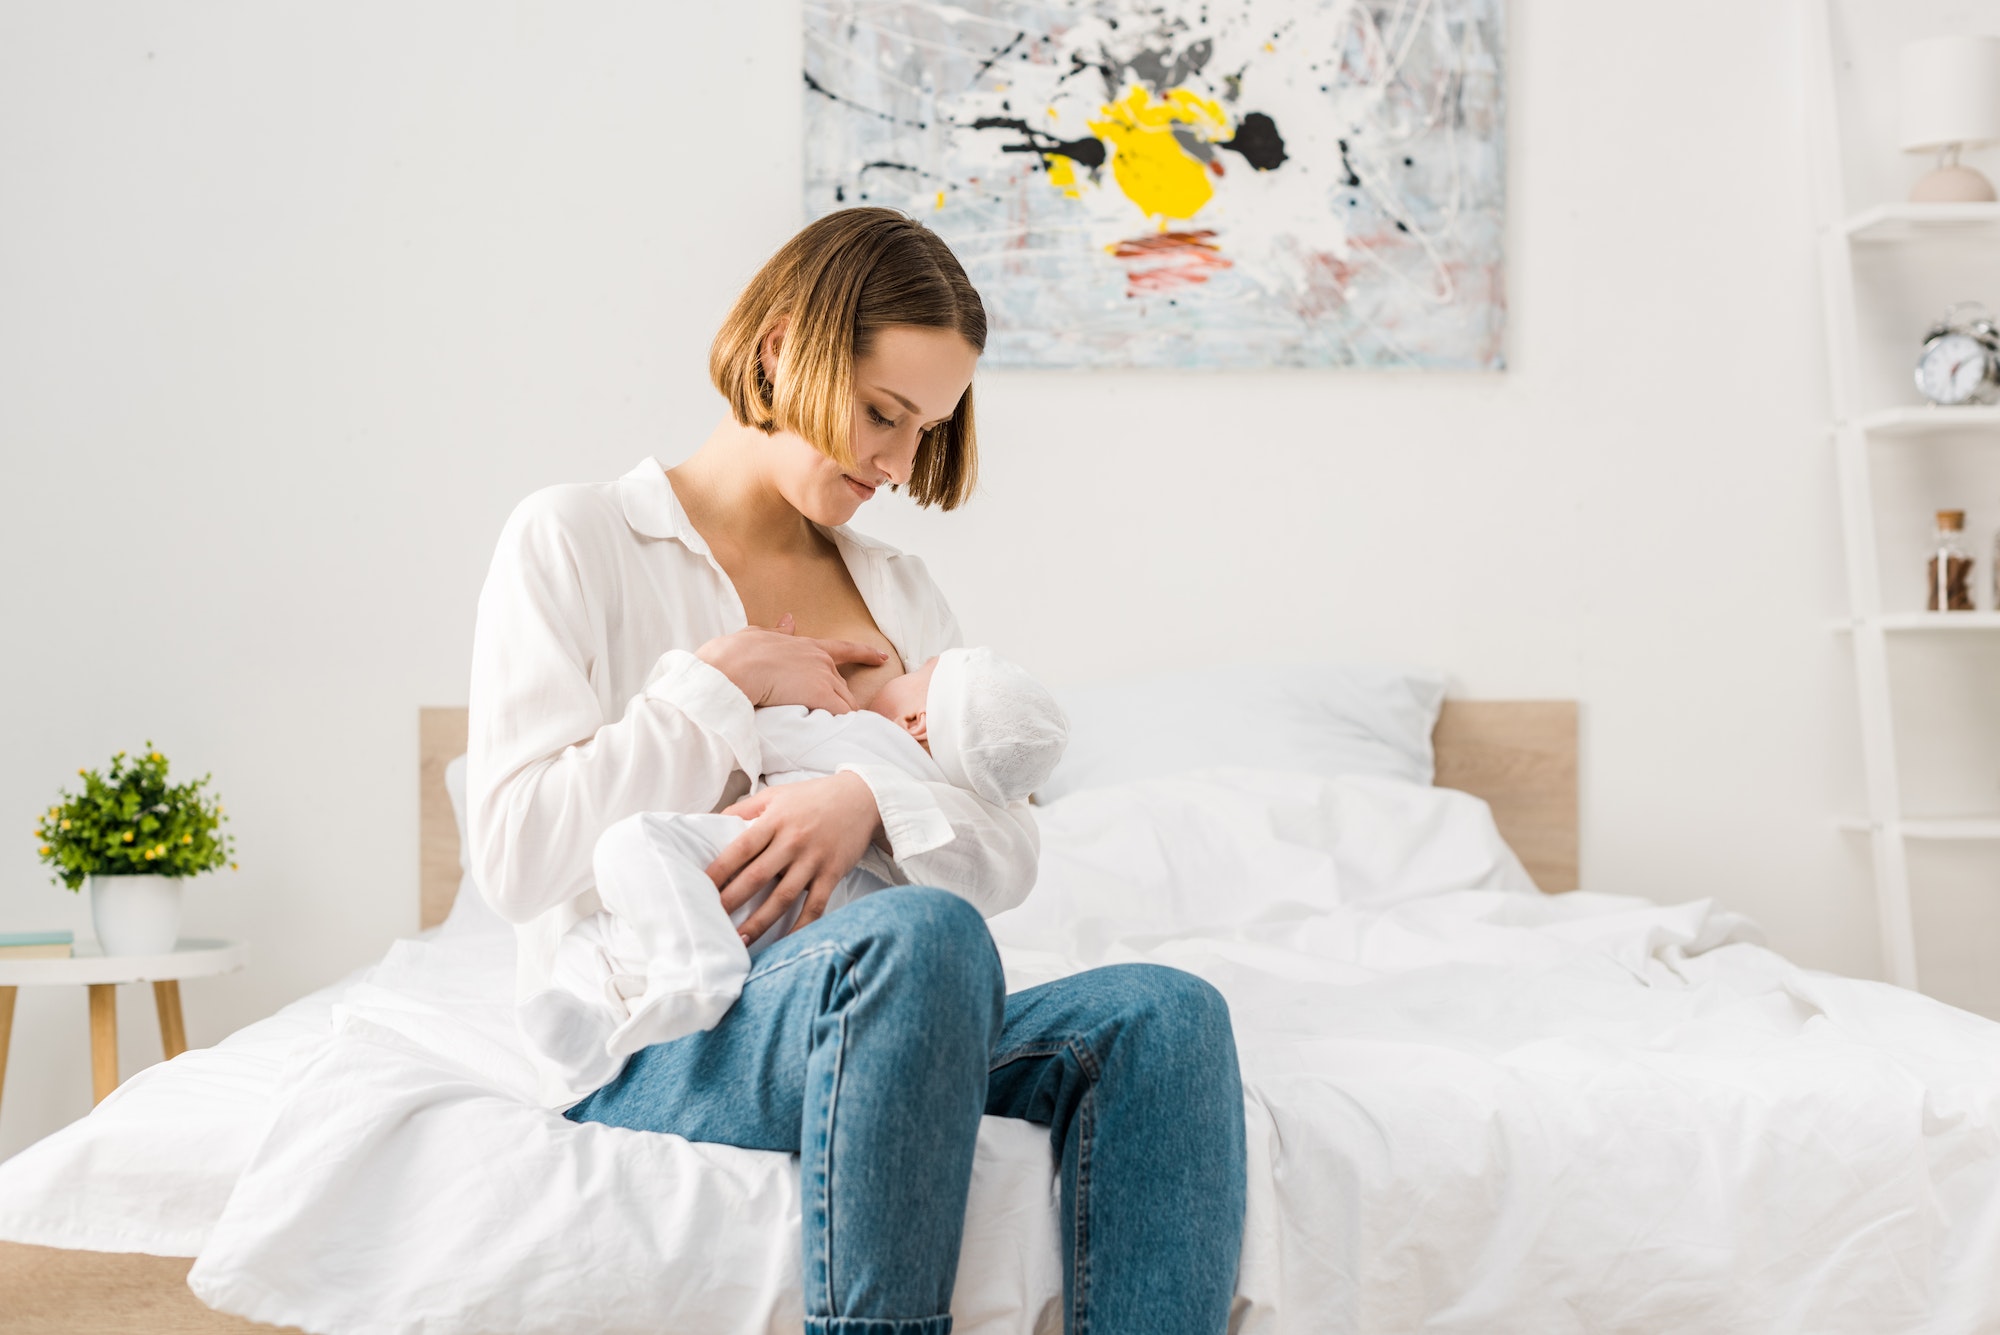 Mother in jeans sitting on bed and breastfeeding baby